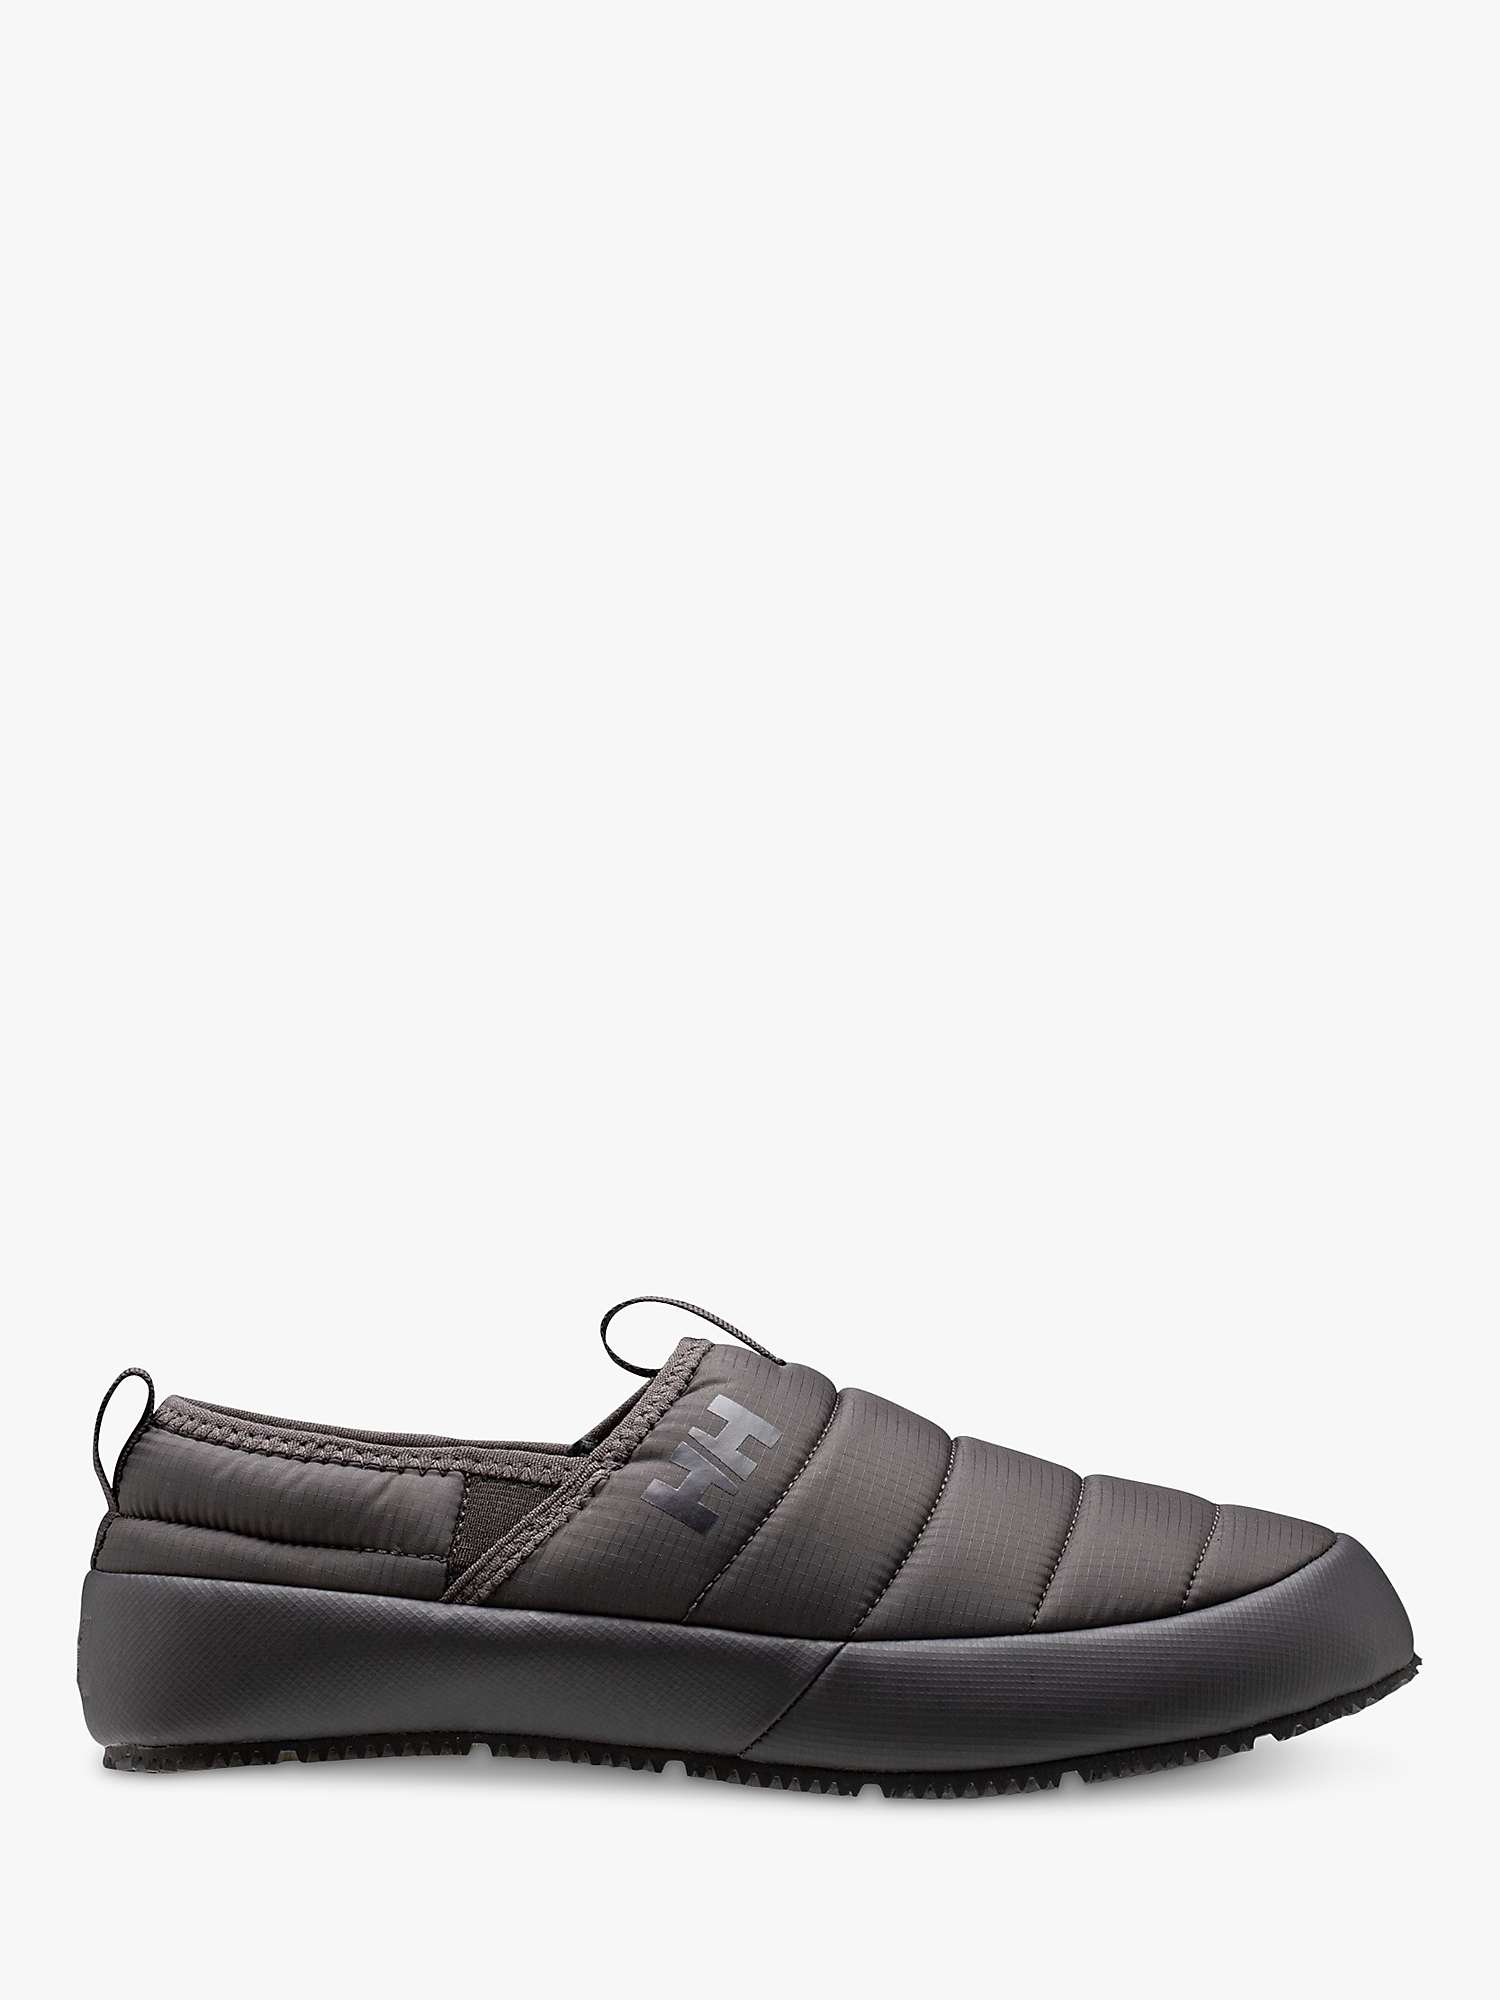 Helly Hansen Cabin Loafers, Black at John Lewis & Partners